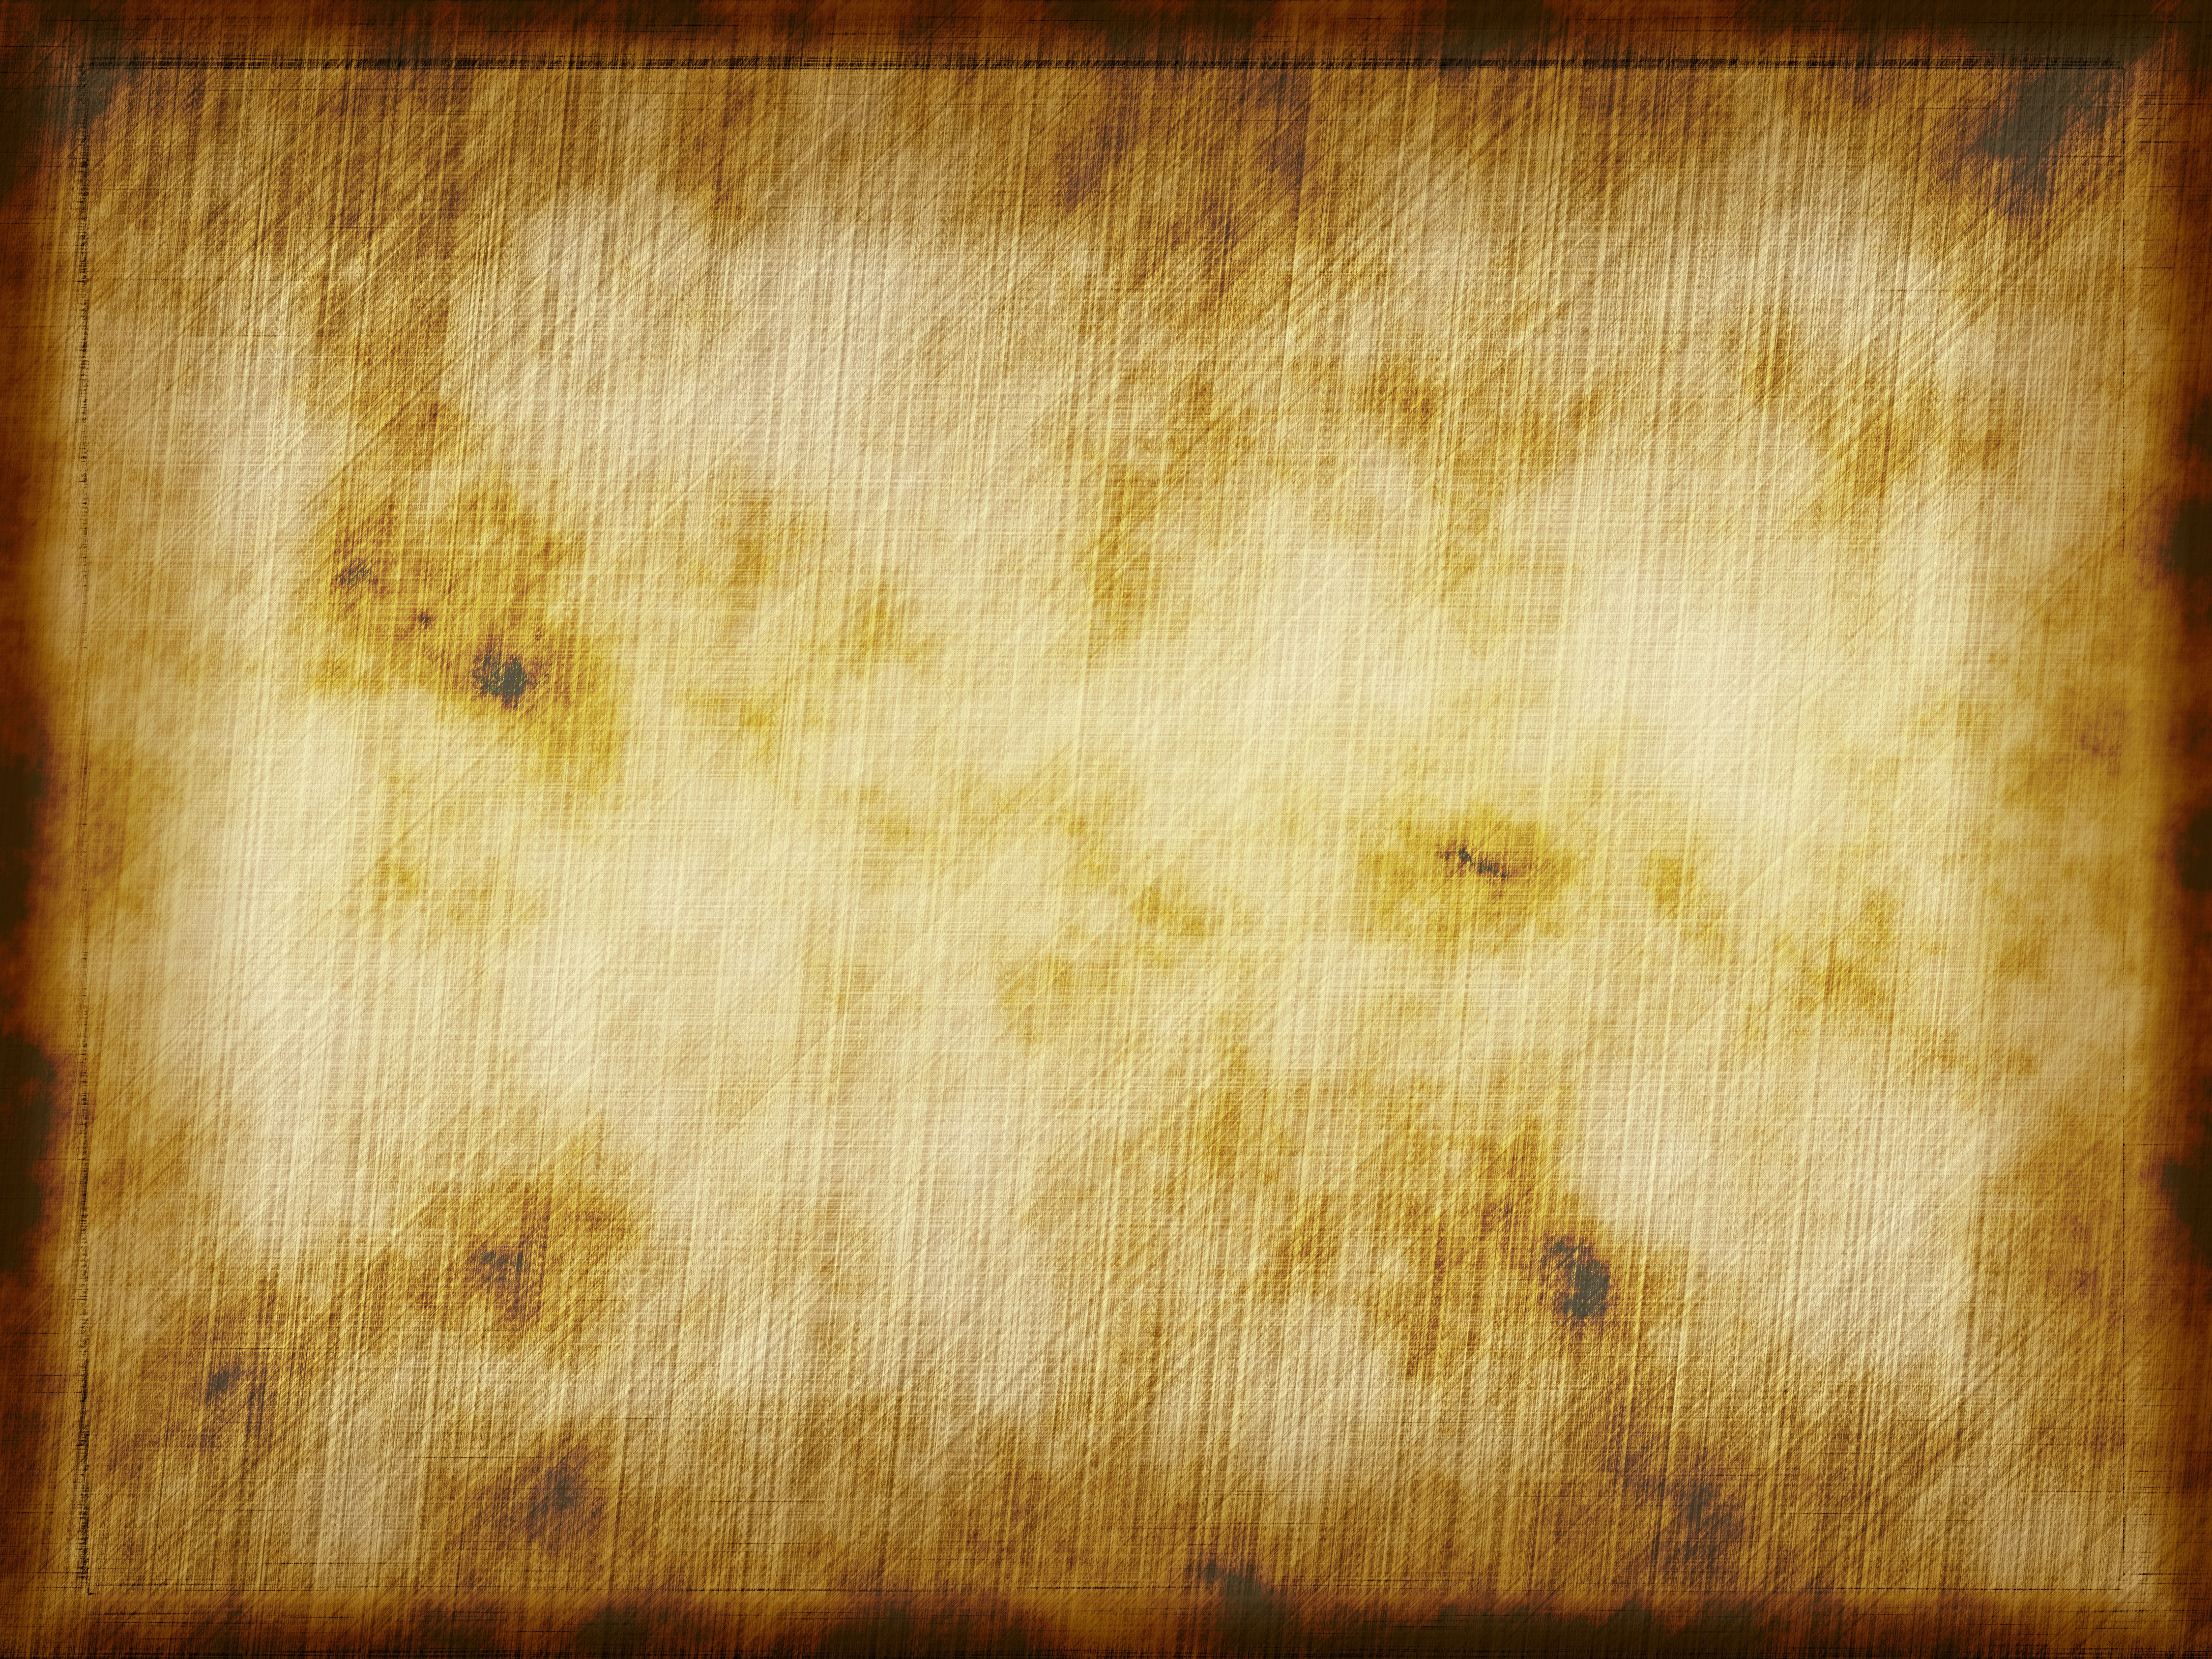 https://www.myfreetextures.com/wp-content/uploads/2011/06/old-and-worn-parchment-paper-background-texture.jpg